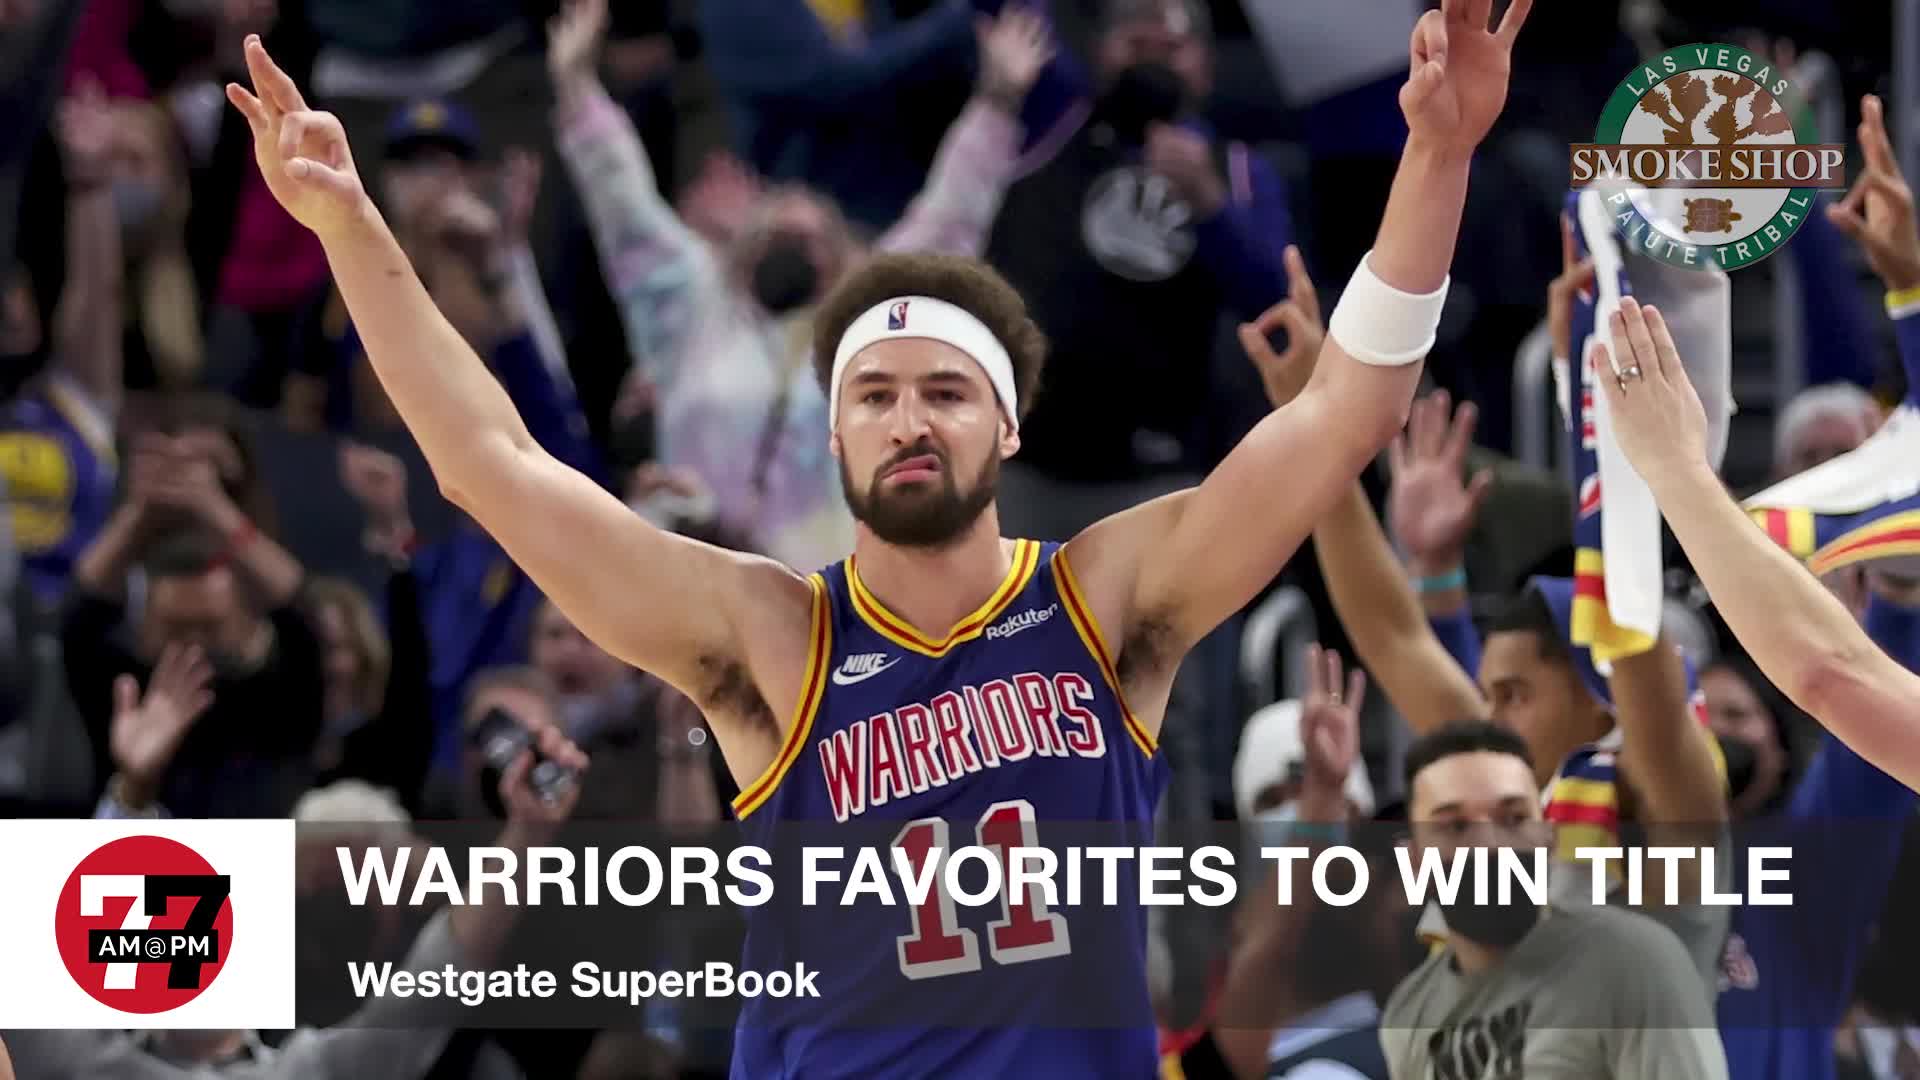 7@7PM Warriors Favorites to Win NBA Title